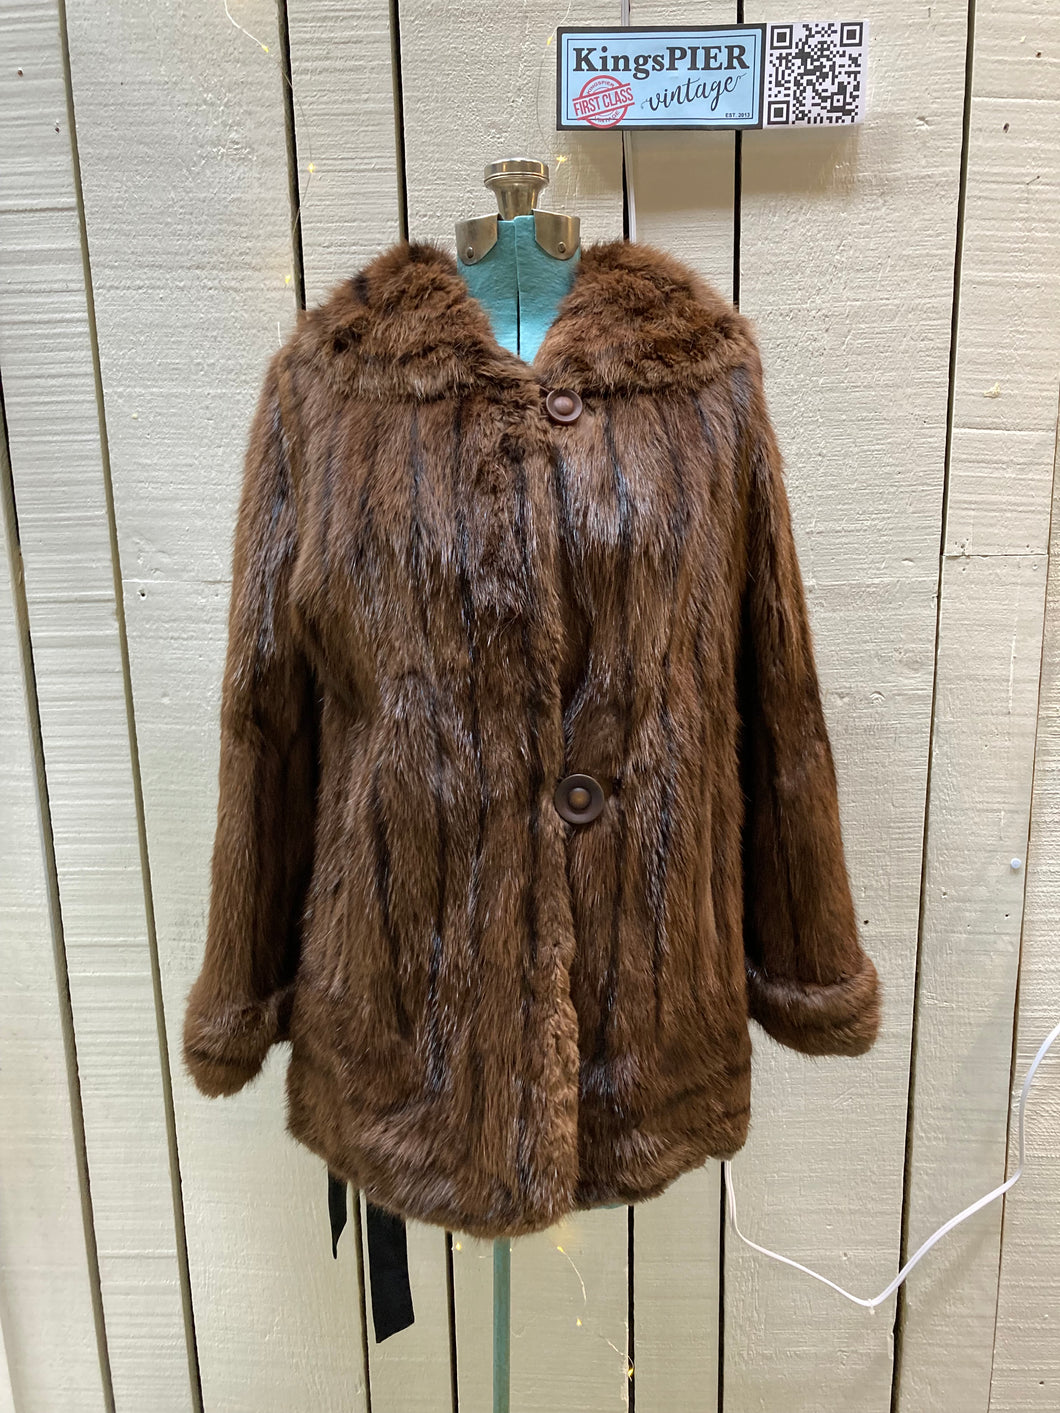 Kingspier Vintage - Vintage Charles Brown Furriers LTD Fur Coat with satin lining, H.D. monogram and large buttons.

Made in Halifax, Canada.